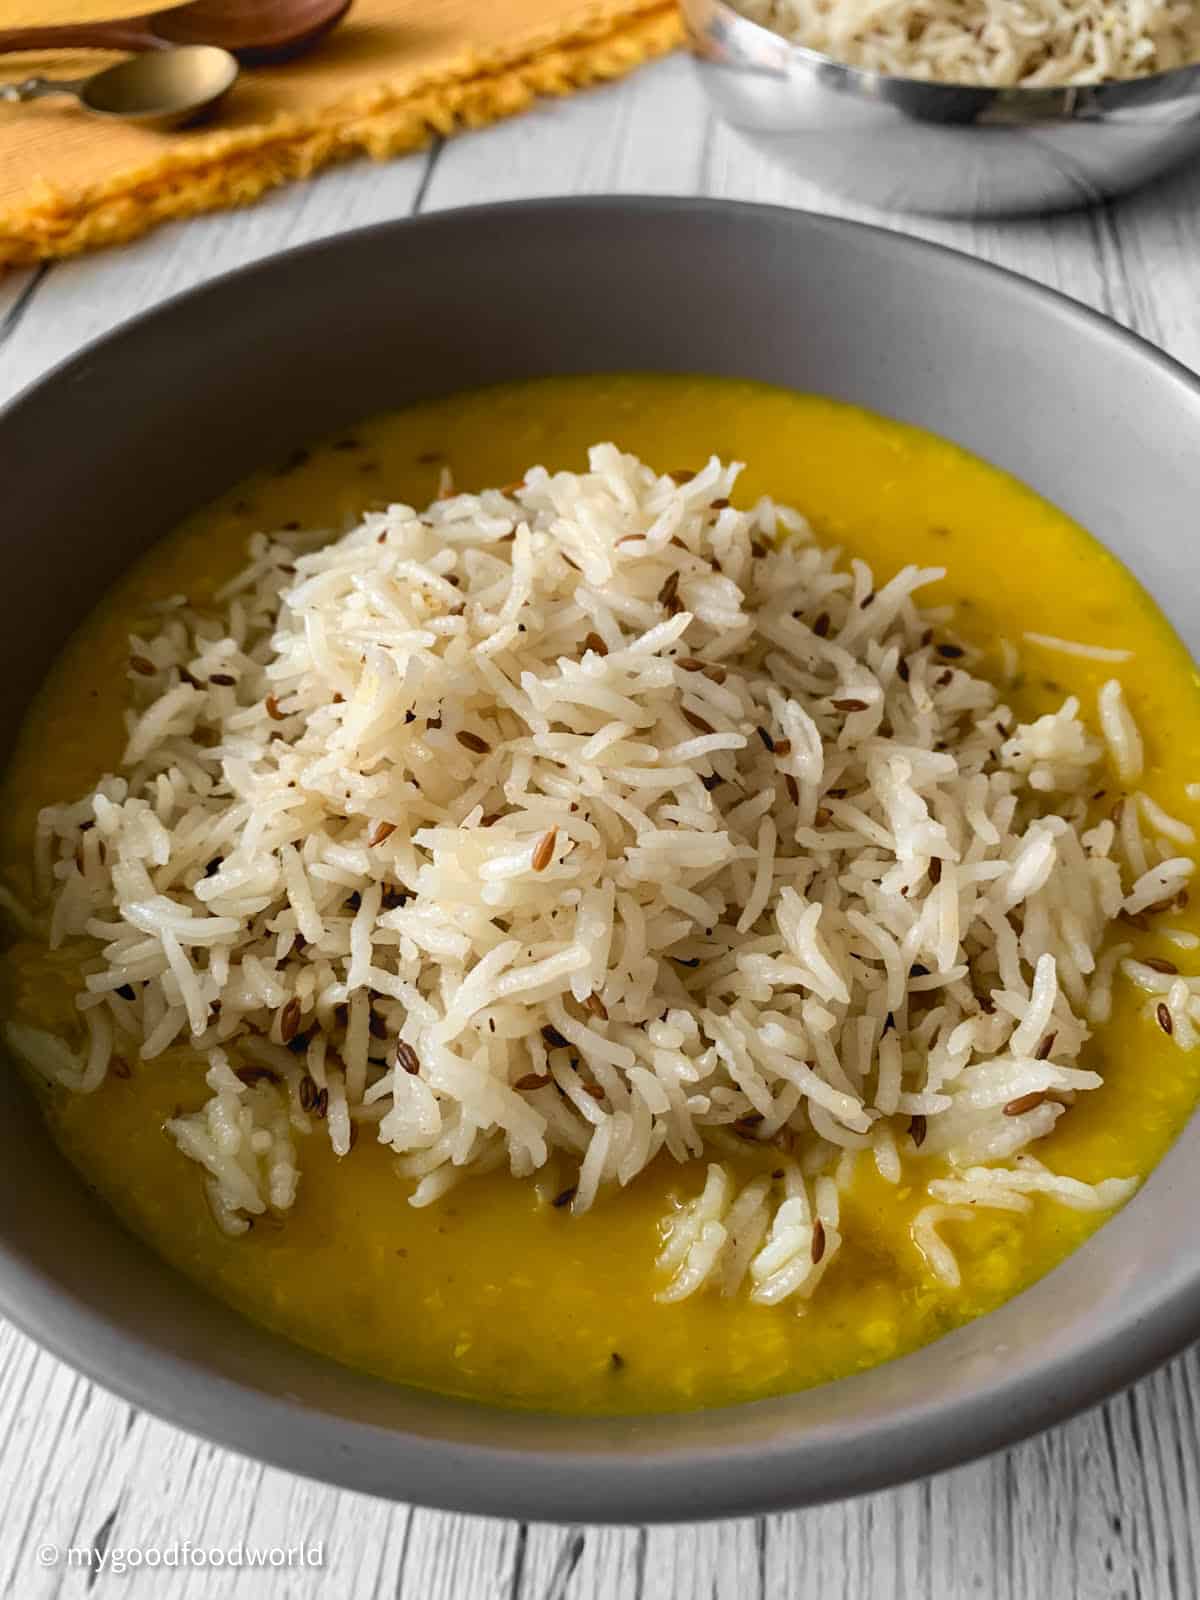 In a round grey colored bowl, some jeera rice is served yellow dal.